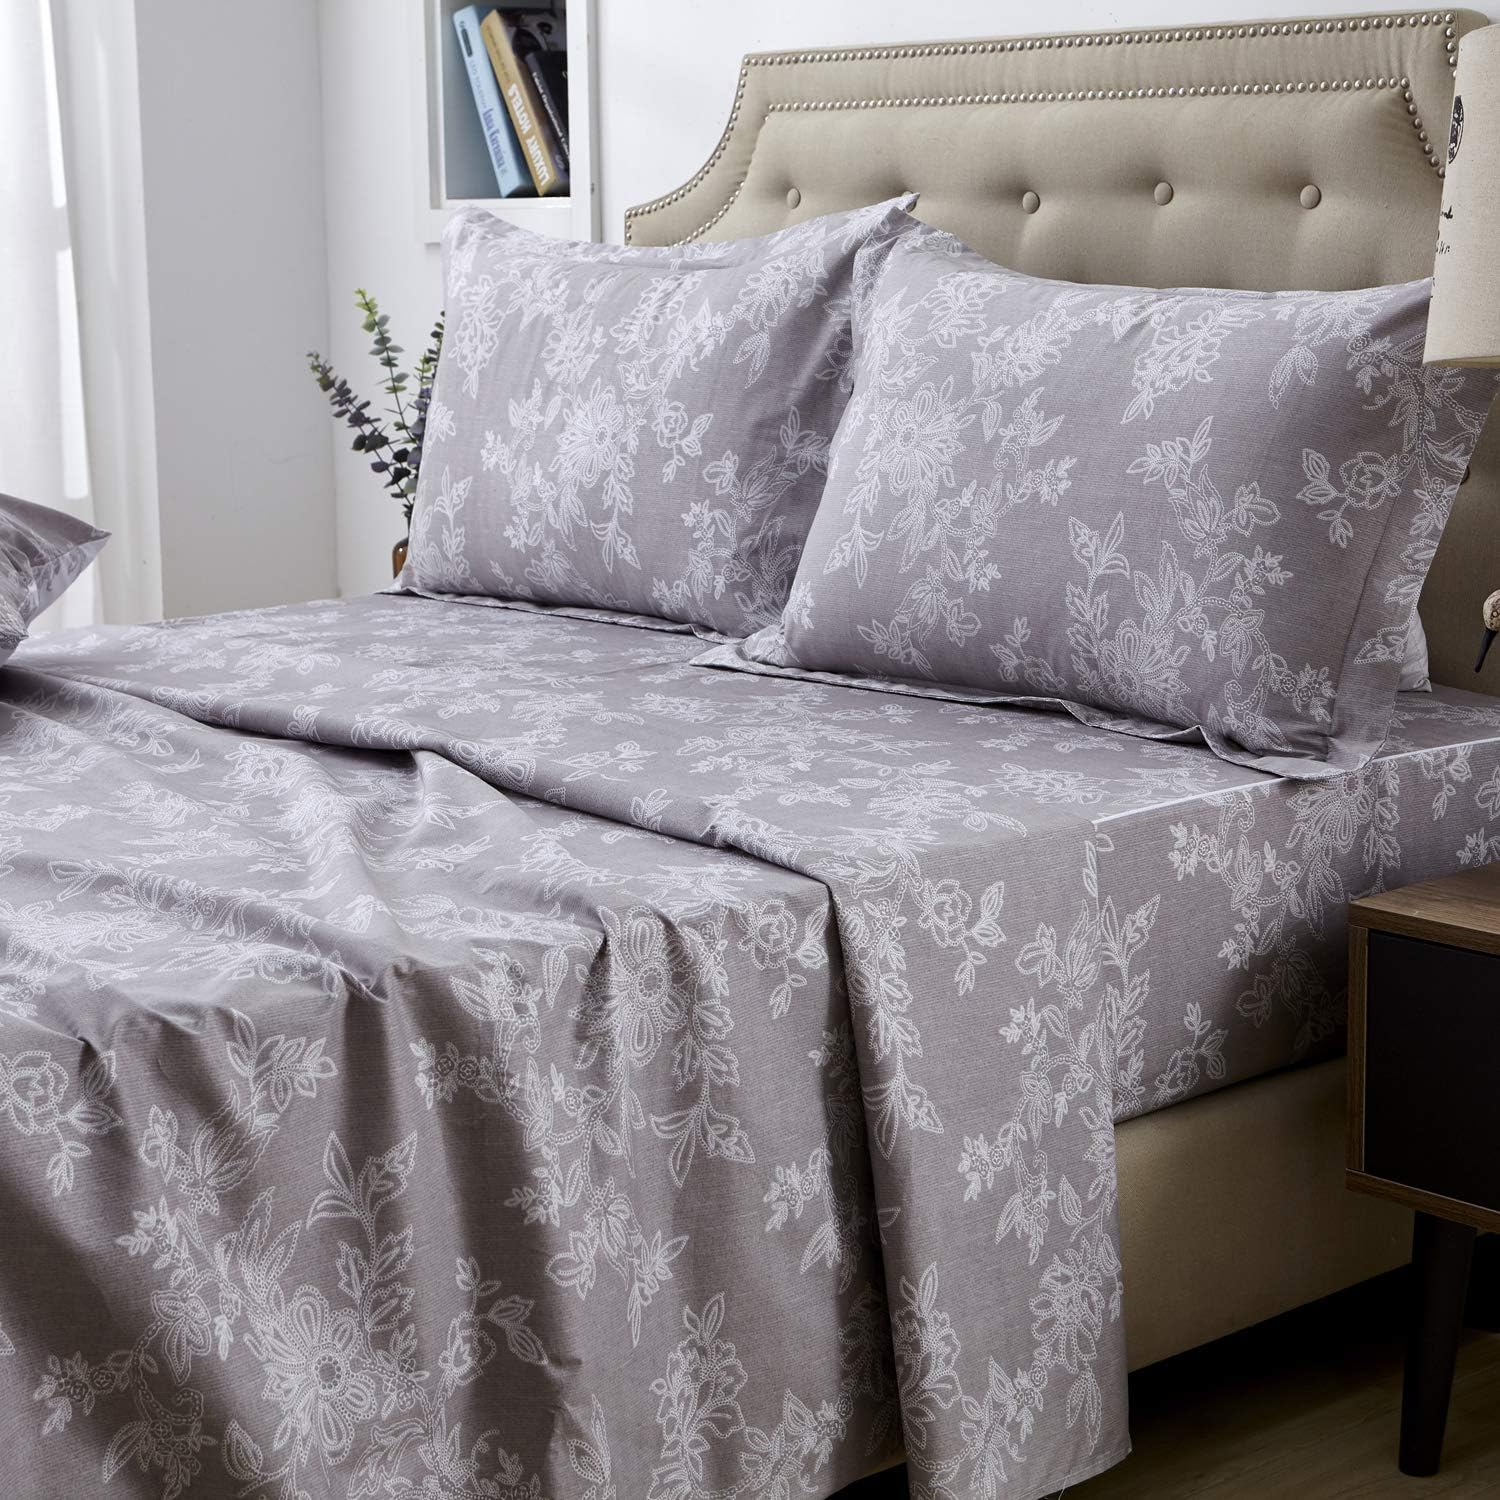 FADFAY Sheet Set Queen Farmhouse Bedding Shabby Floral Vintage Gray Bedding 100% Cotton Super Soft Hypoallergenic Grey and White Deep Pocket Fitted Sheet 4-Pieces Queen Size